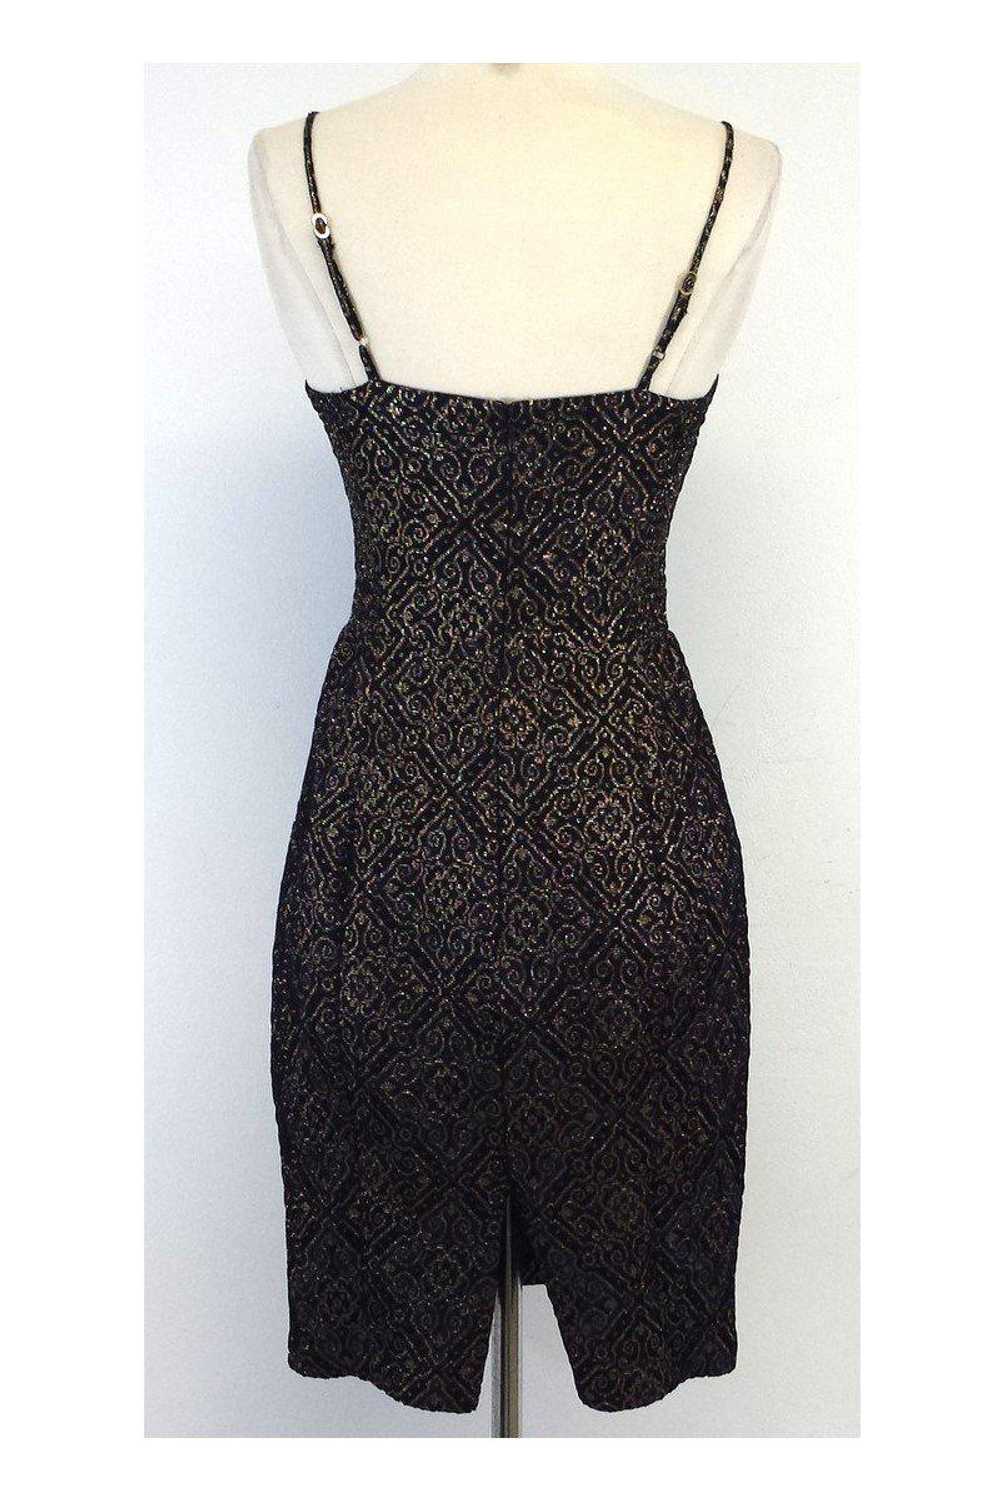 Betsey Johnson - Embroidered Bodycon Dress Sz 2 - image 3